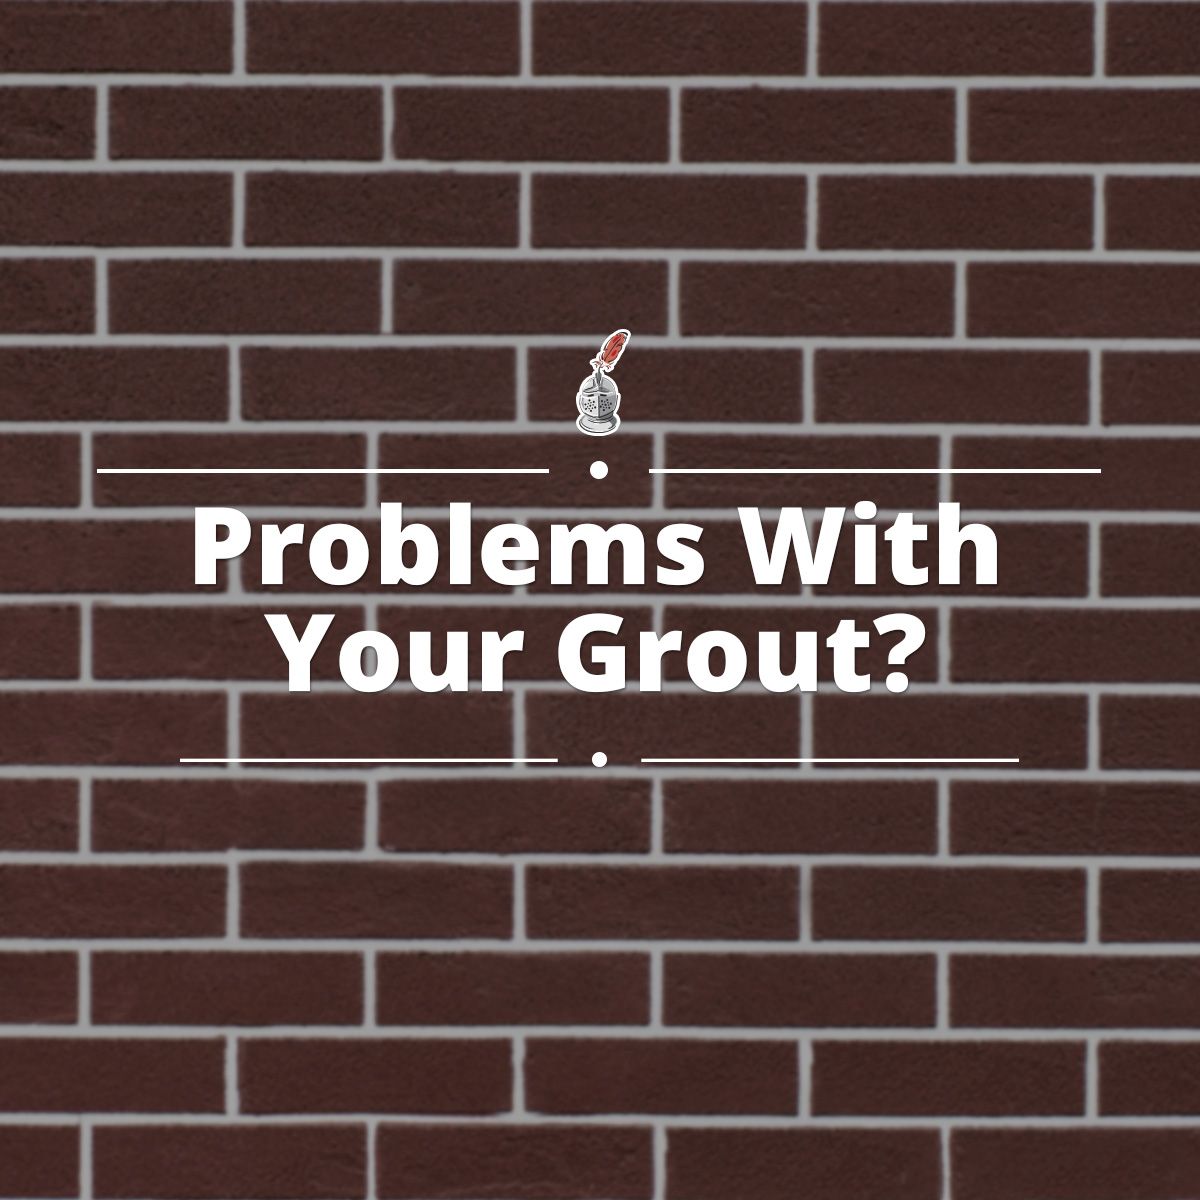 Problems With Your Grout?